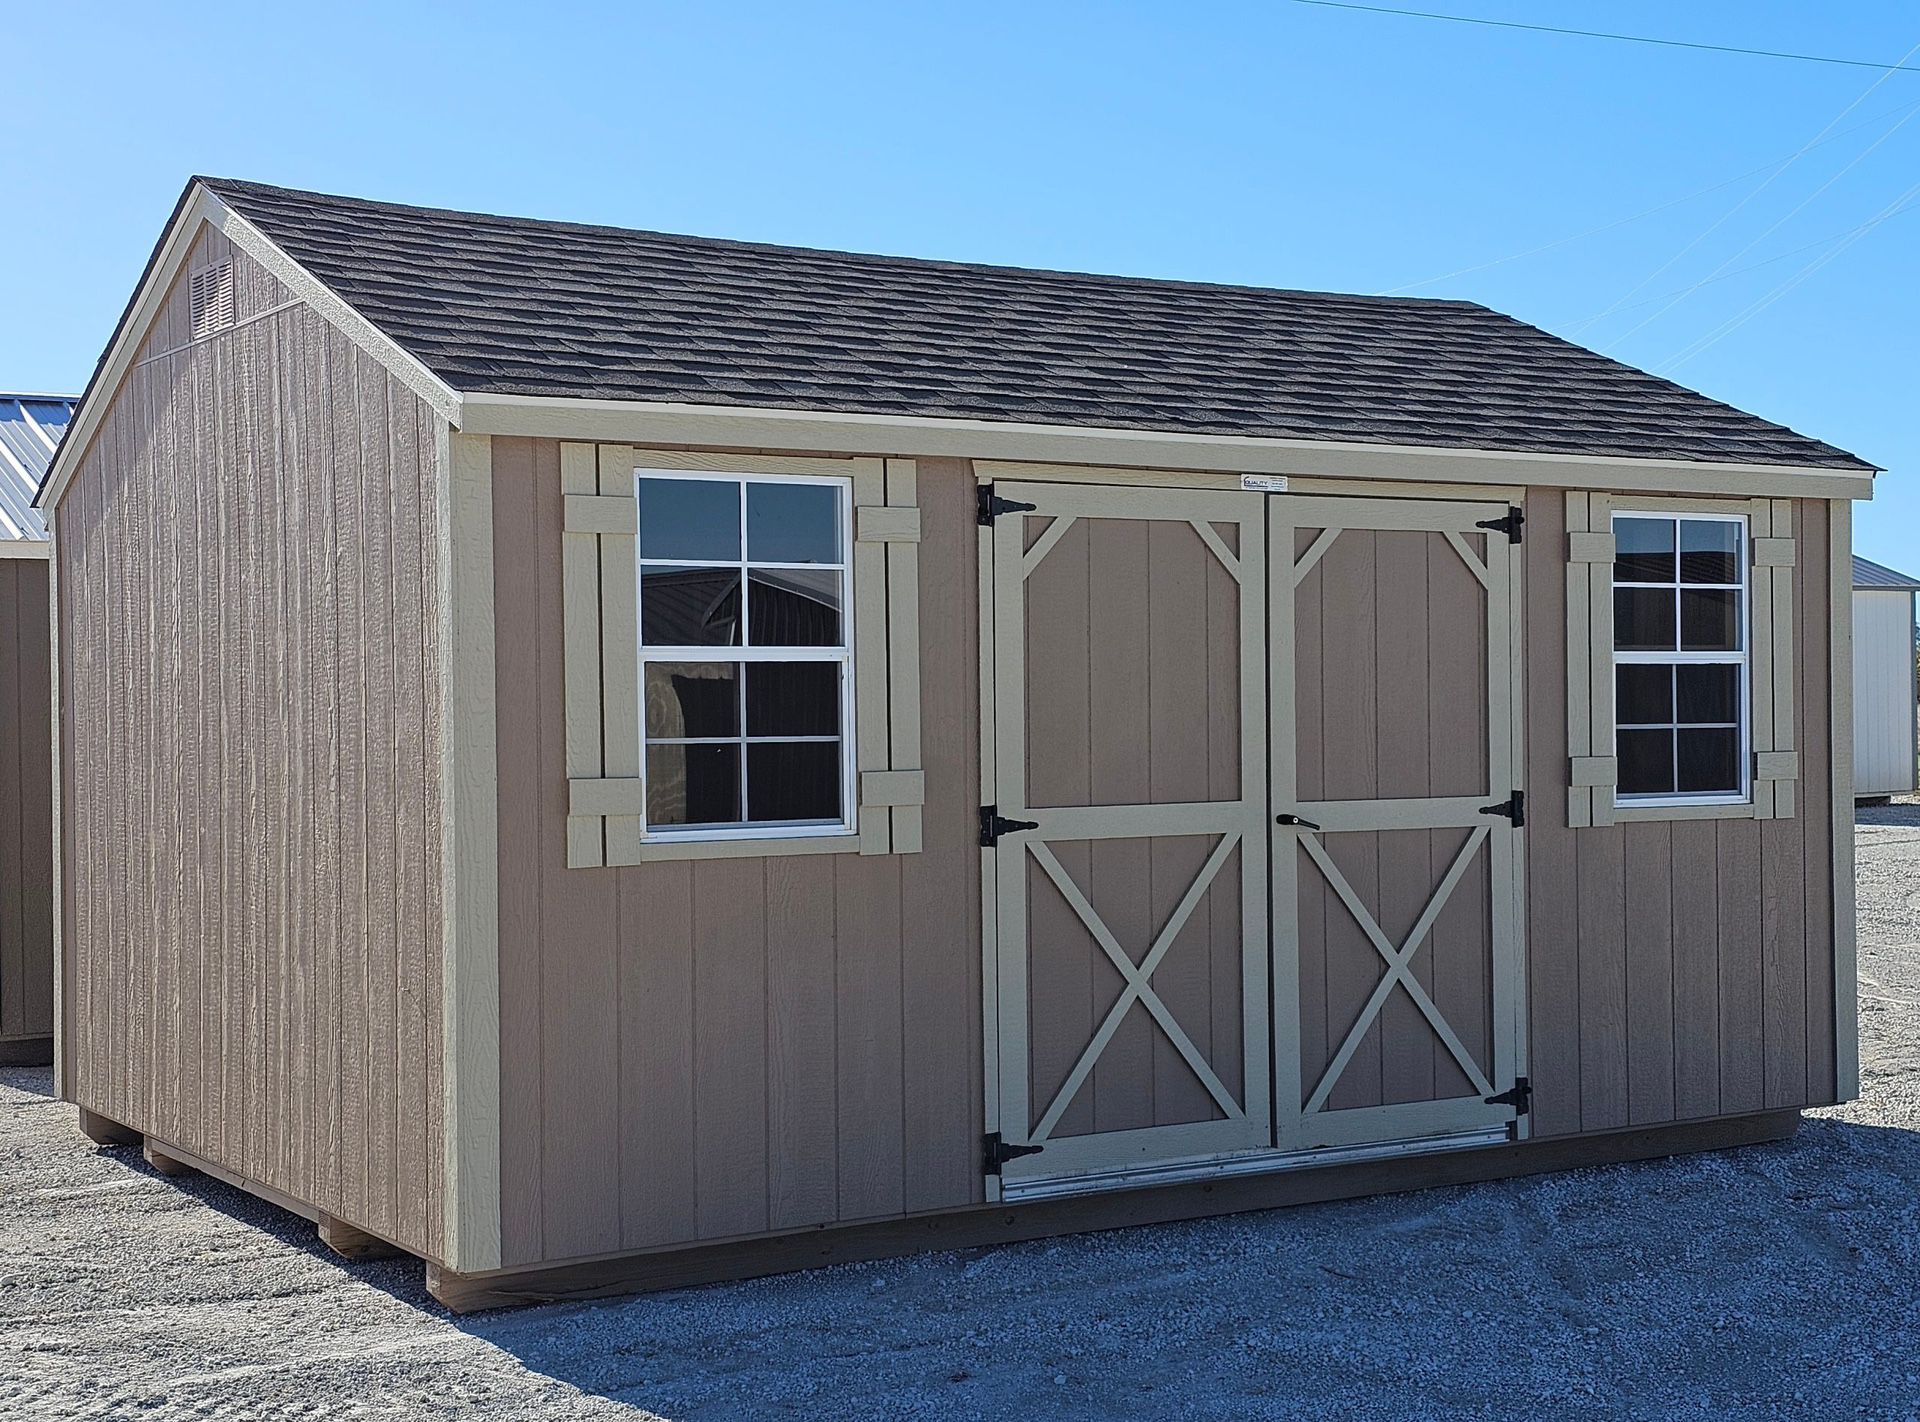 PREOWNED 12x16 Garden Shed FOR SALE